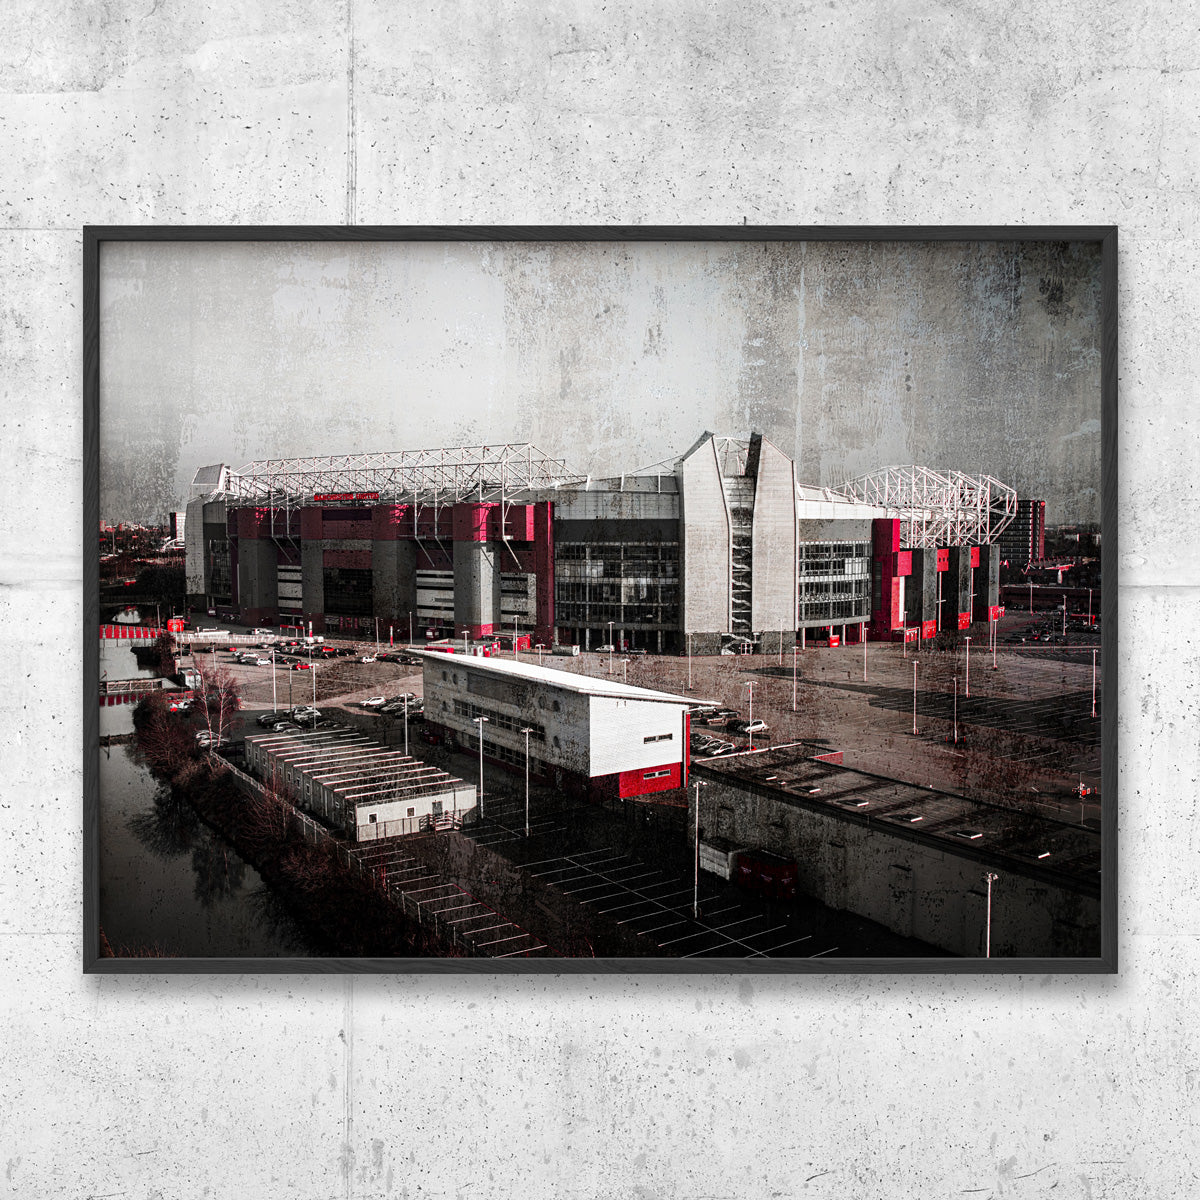 Old Trafford Poster